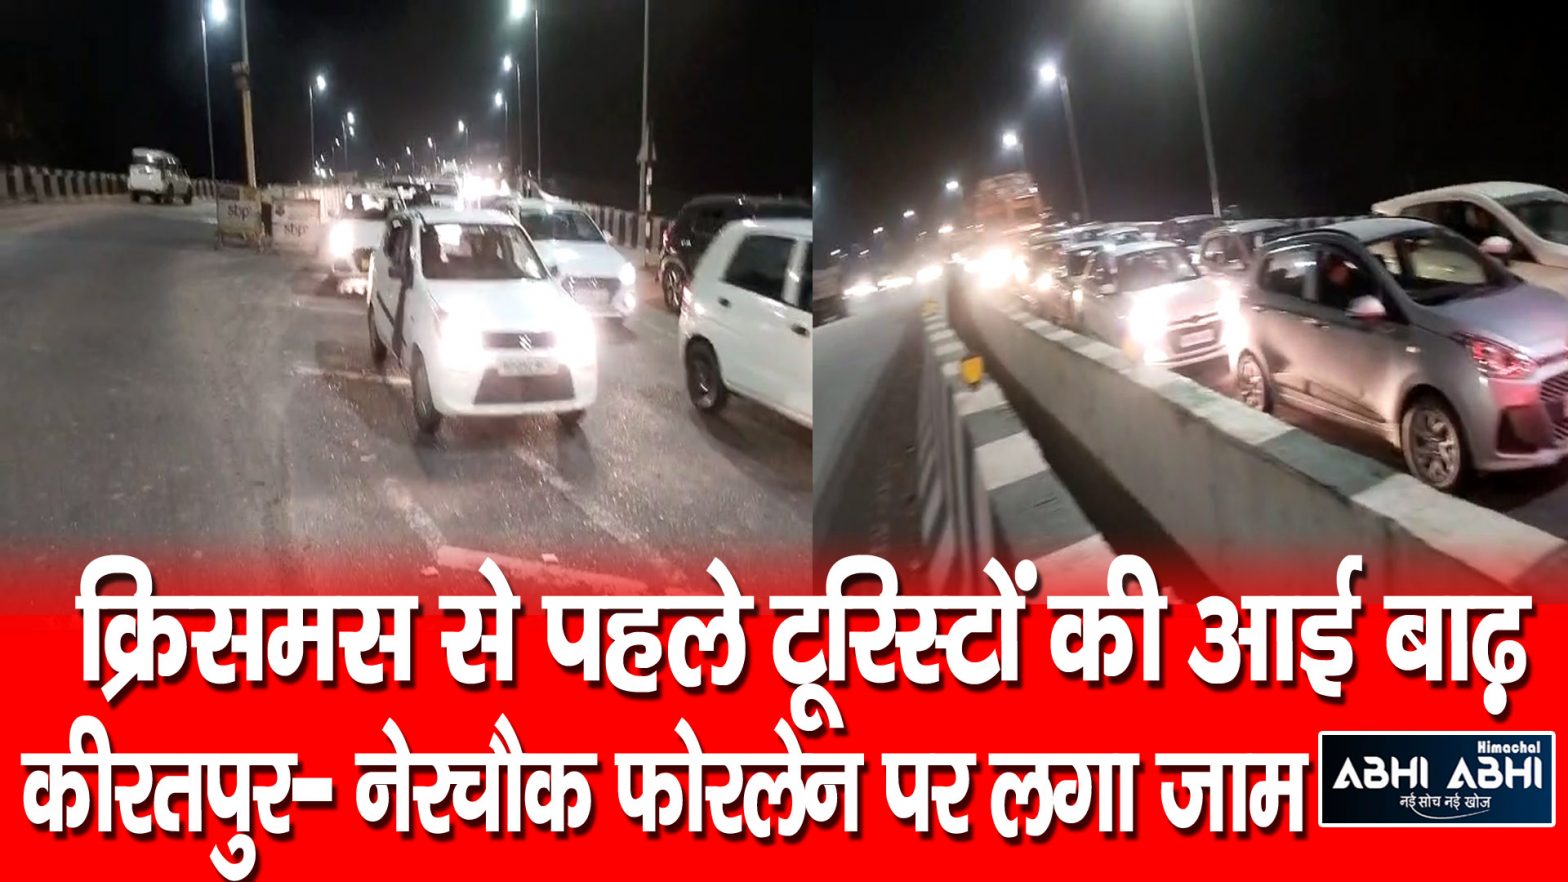 Christmas and weekend rush forced traffic jam in himachal Pradesh